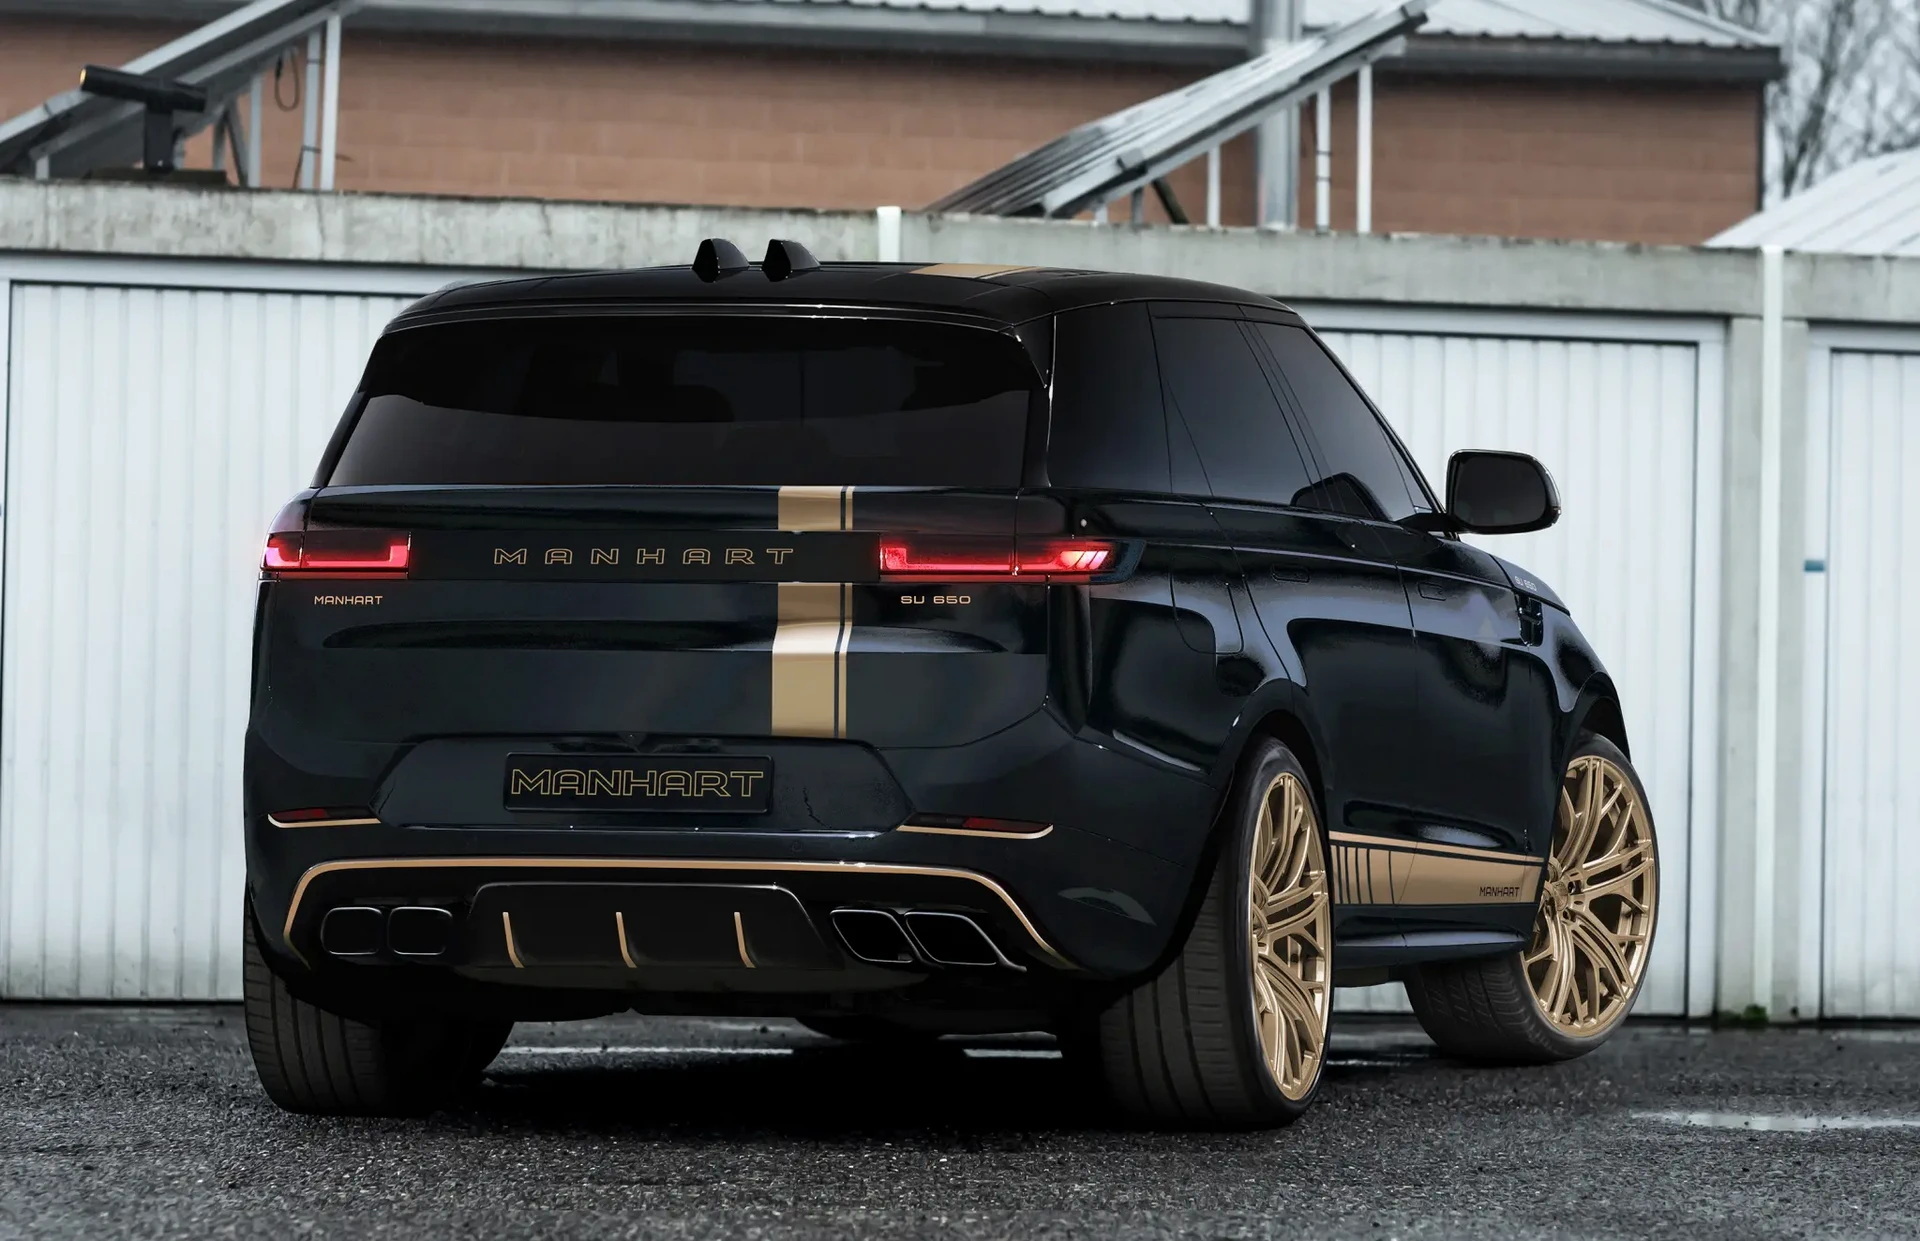 Manhart Previews Range Rover Sport With 641 HP And Gold 24-Inch Wheels